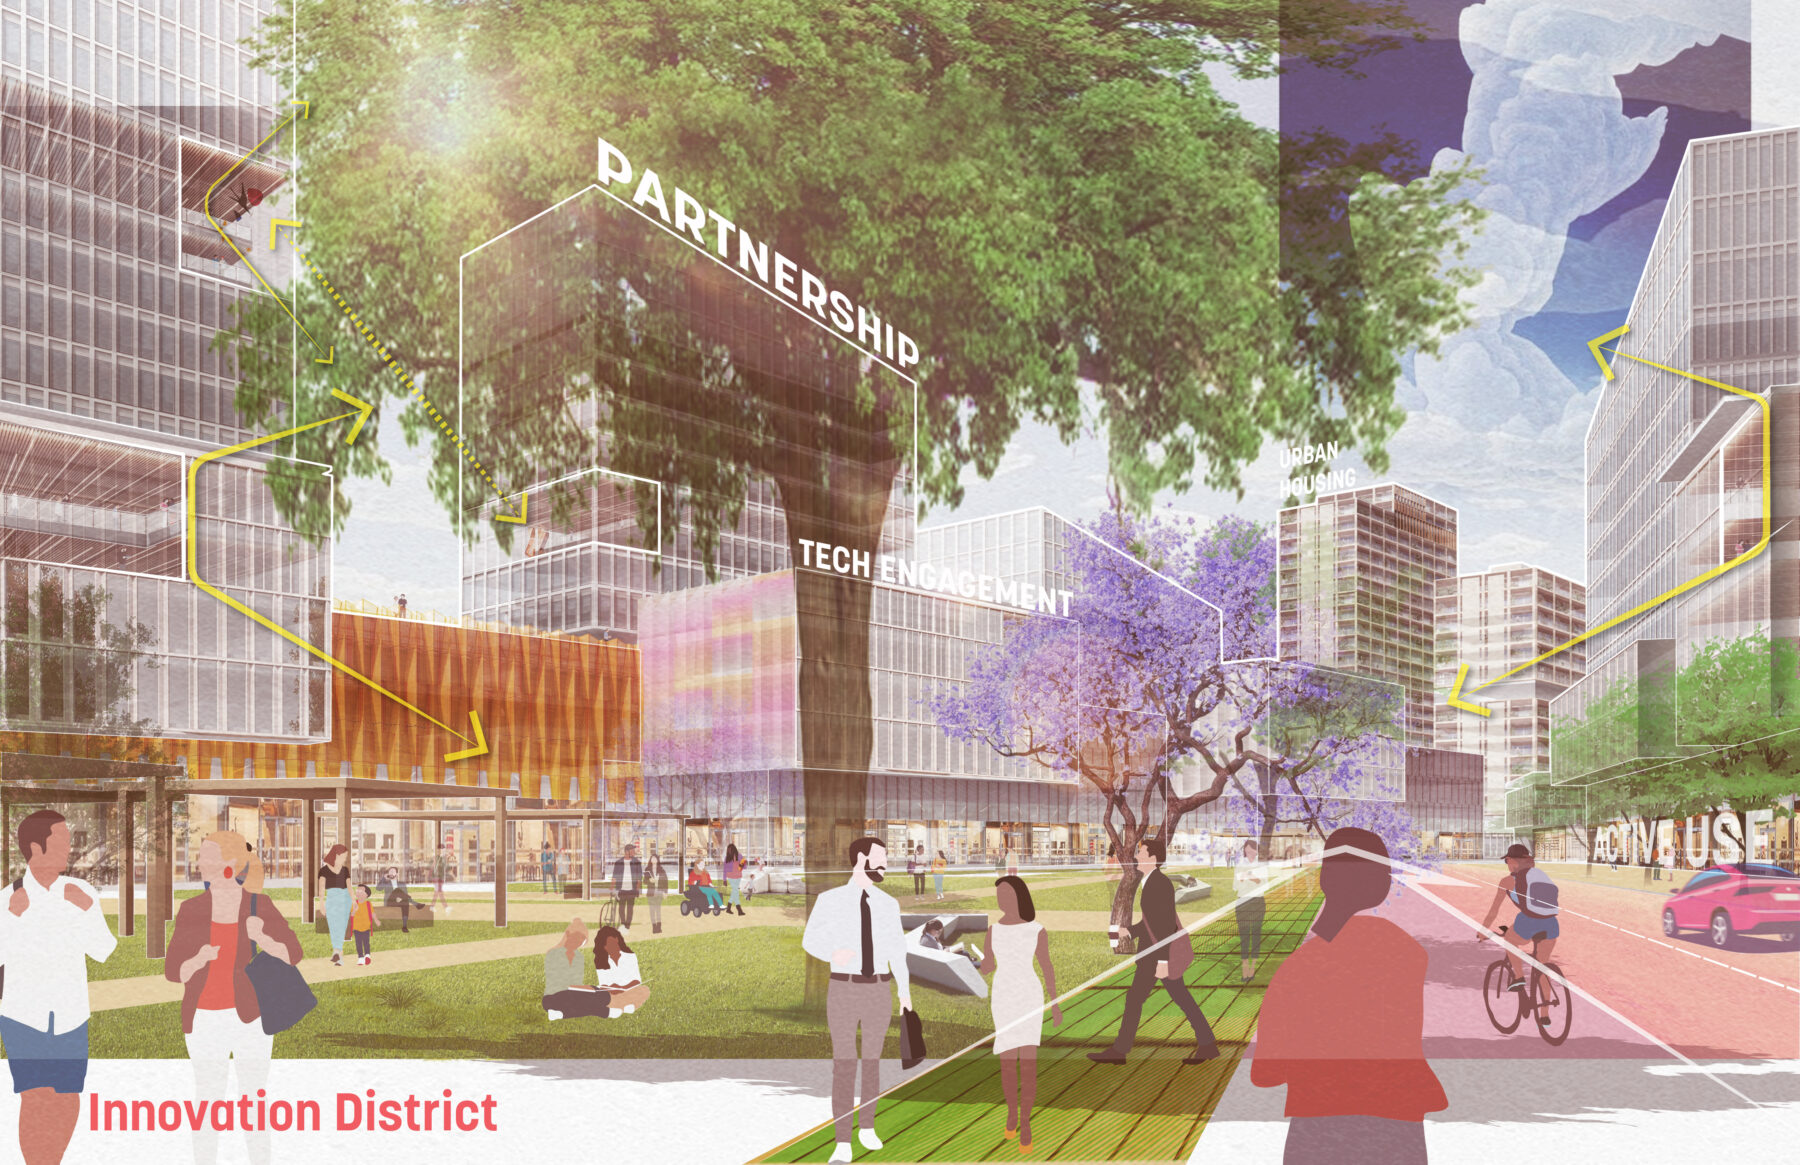 Illustrated graphic showing the new Innovation District activated with bikers and pedestrians in a new public realm